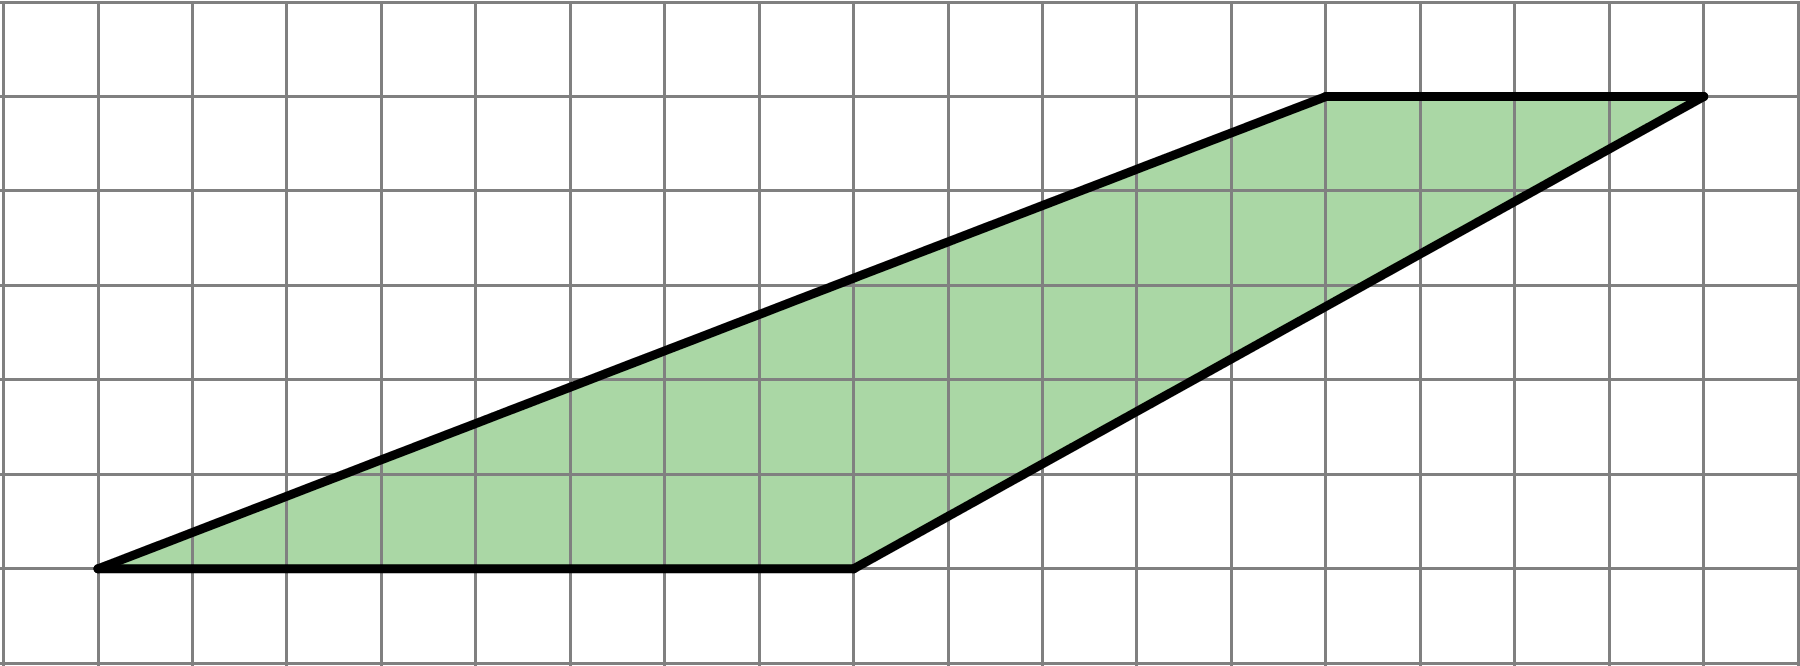 A quadrilateral with a bottom side length of 8 units, a top side length of 4 units. The left side ascends 5 units while moving right 13 units, and the right side ascends 5 units while moving right 9 units.